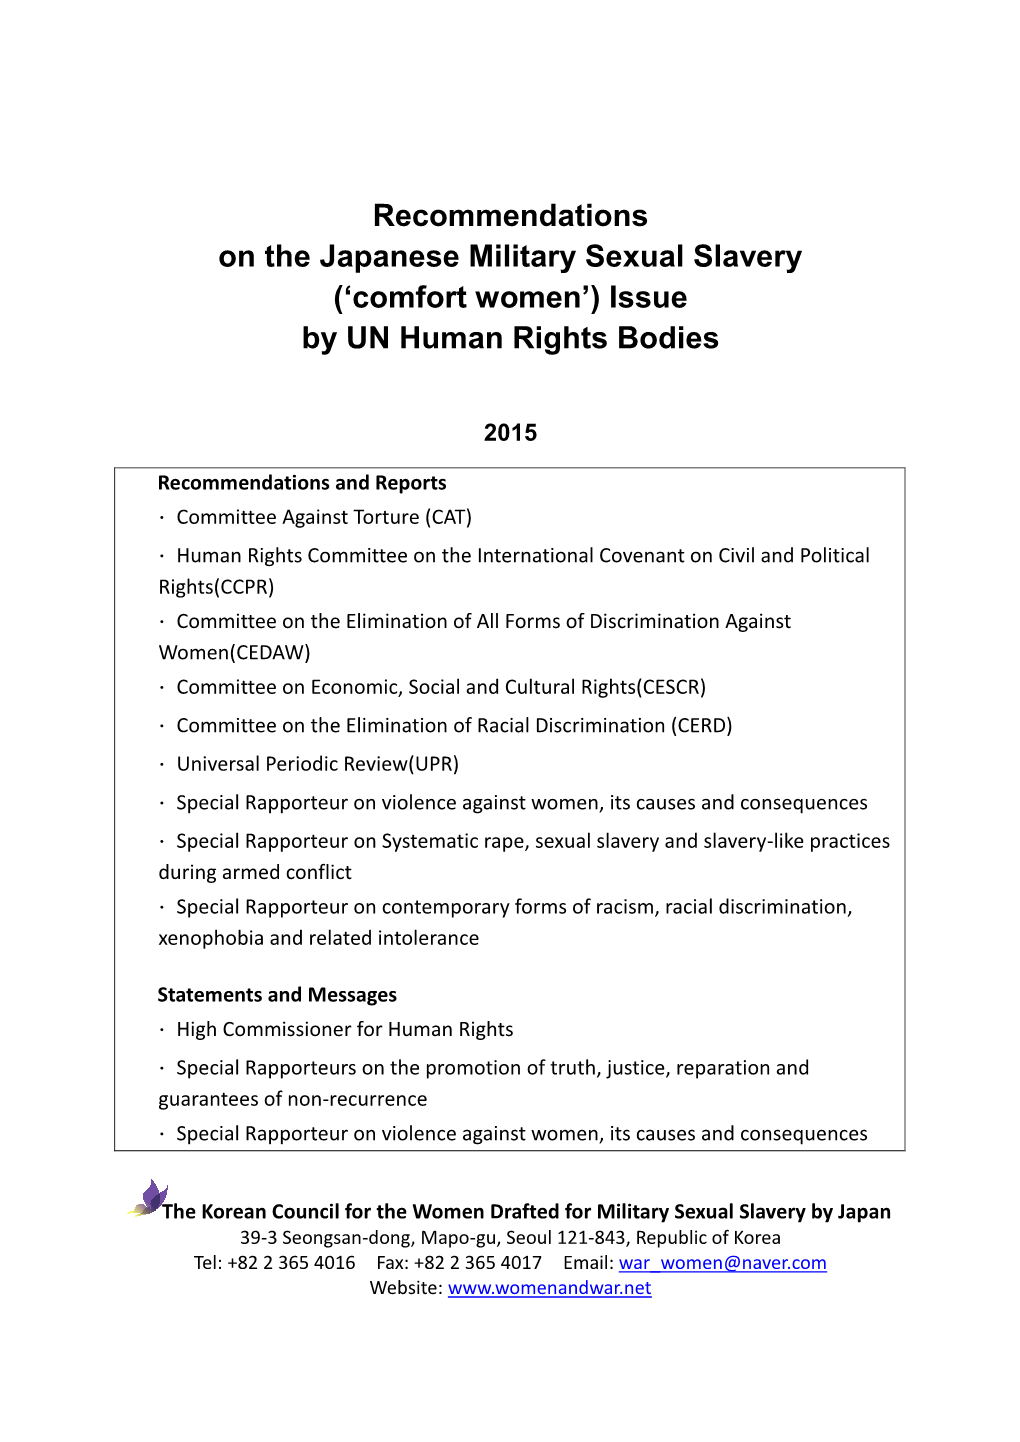 Recommendations on the Japanese Military Sexual Slavery ('Comfort